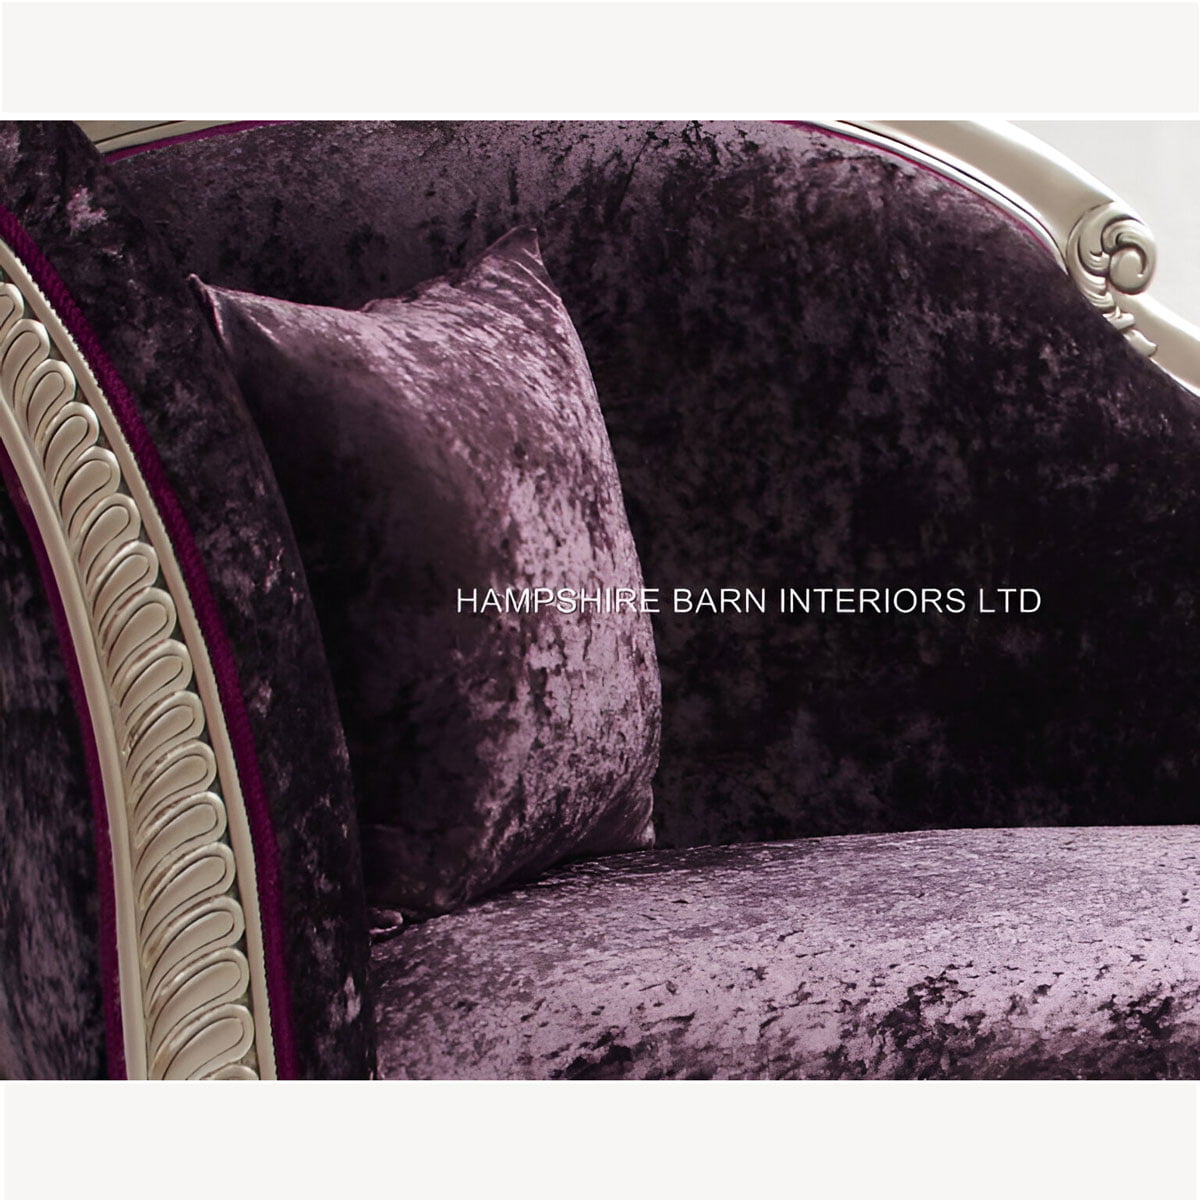 Beautiful Silver Leaf Ornate Platinum Chaise With Crushed Purple Mulberry Velvet 3 - Hampshire Barn Interiors - Beautiful Silver Leaf Ornate Platinum Chaise With Crushed Purple Mulberry Velvet -